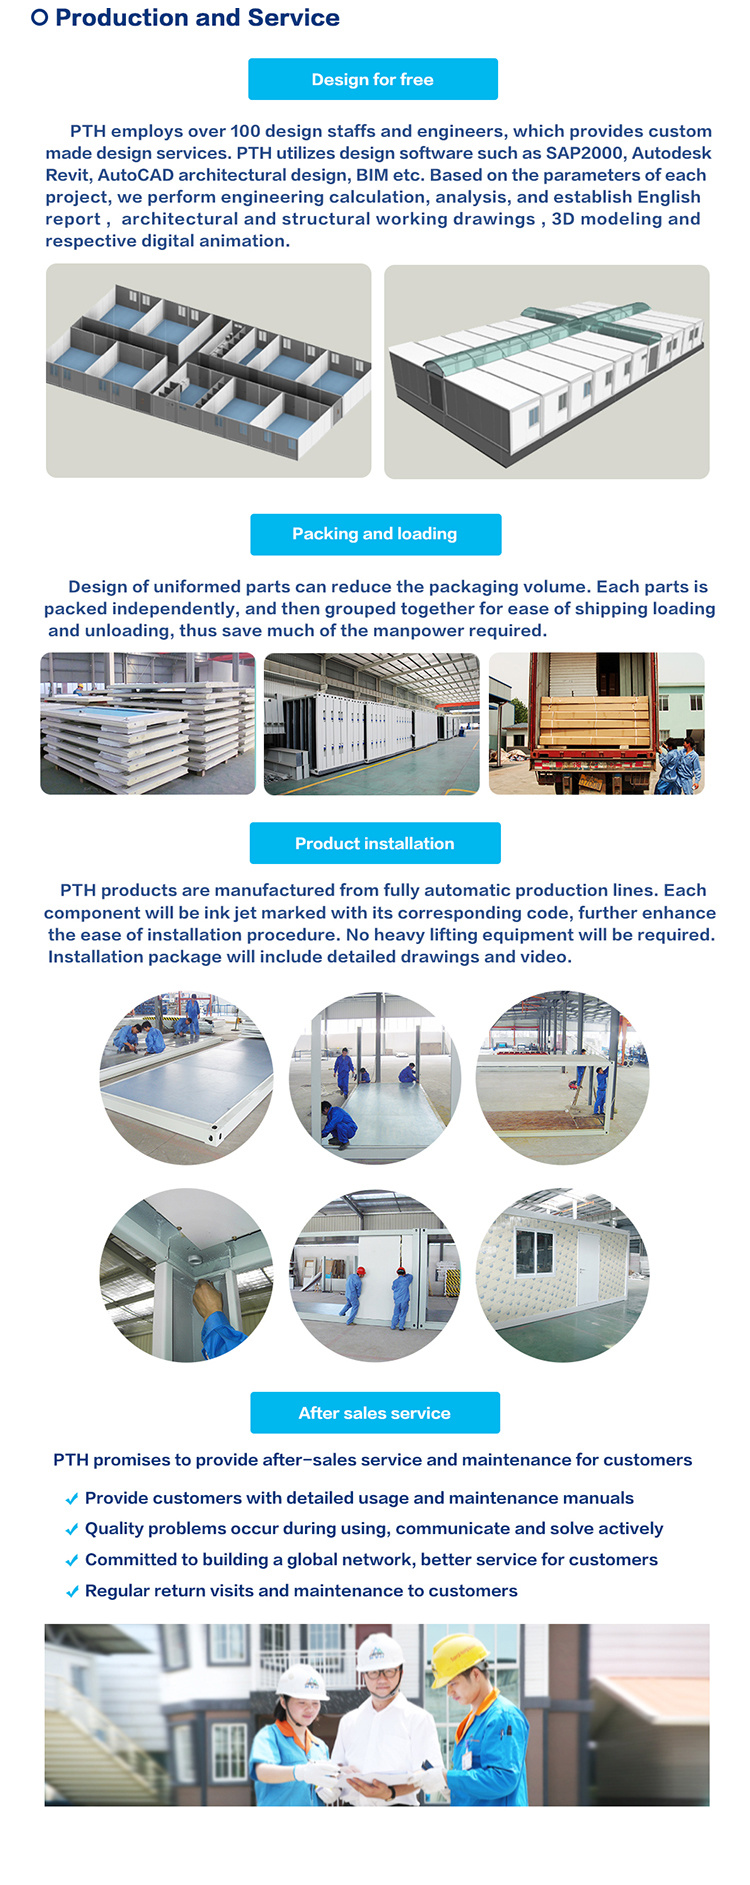 Prefabricated Flat Pack Ce Certified Container Office Building